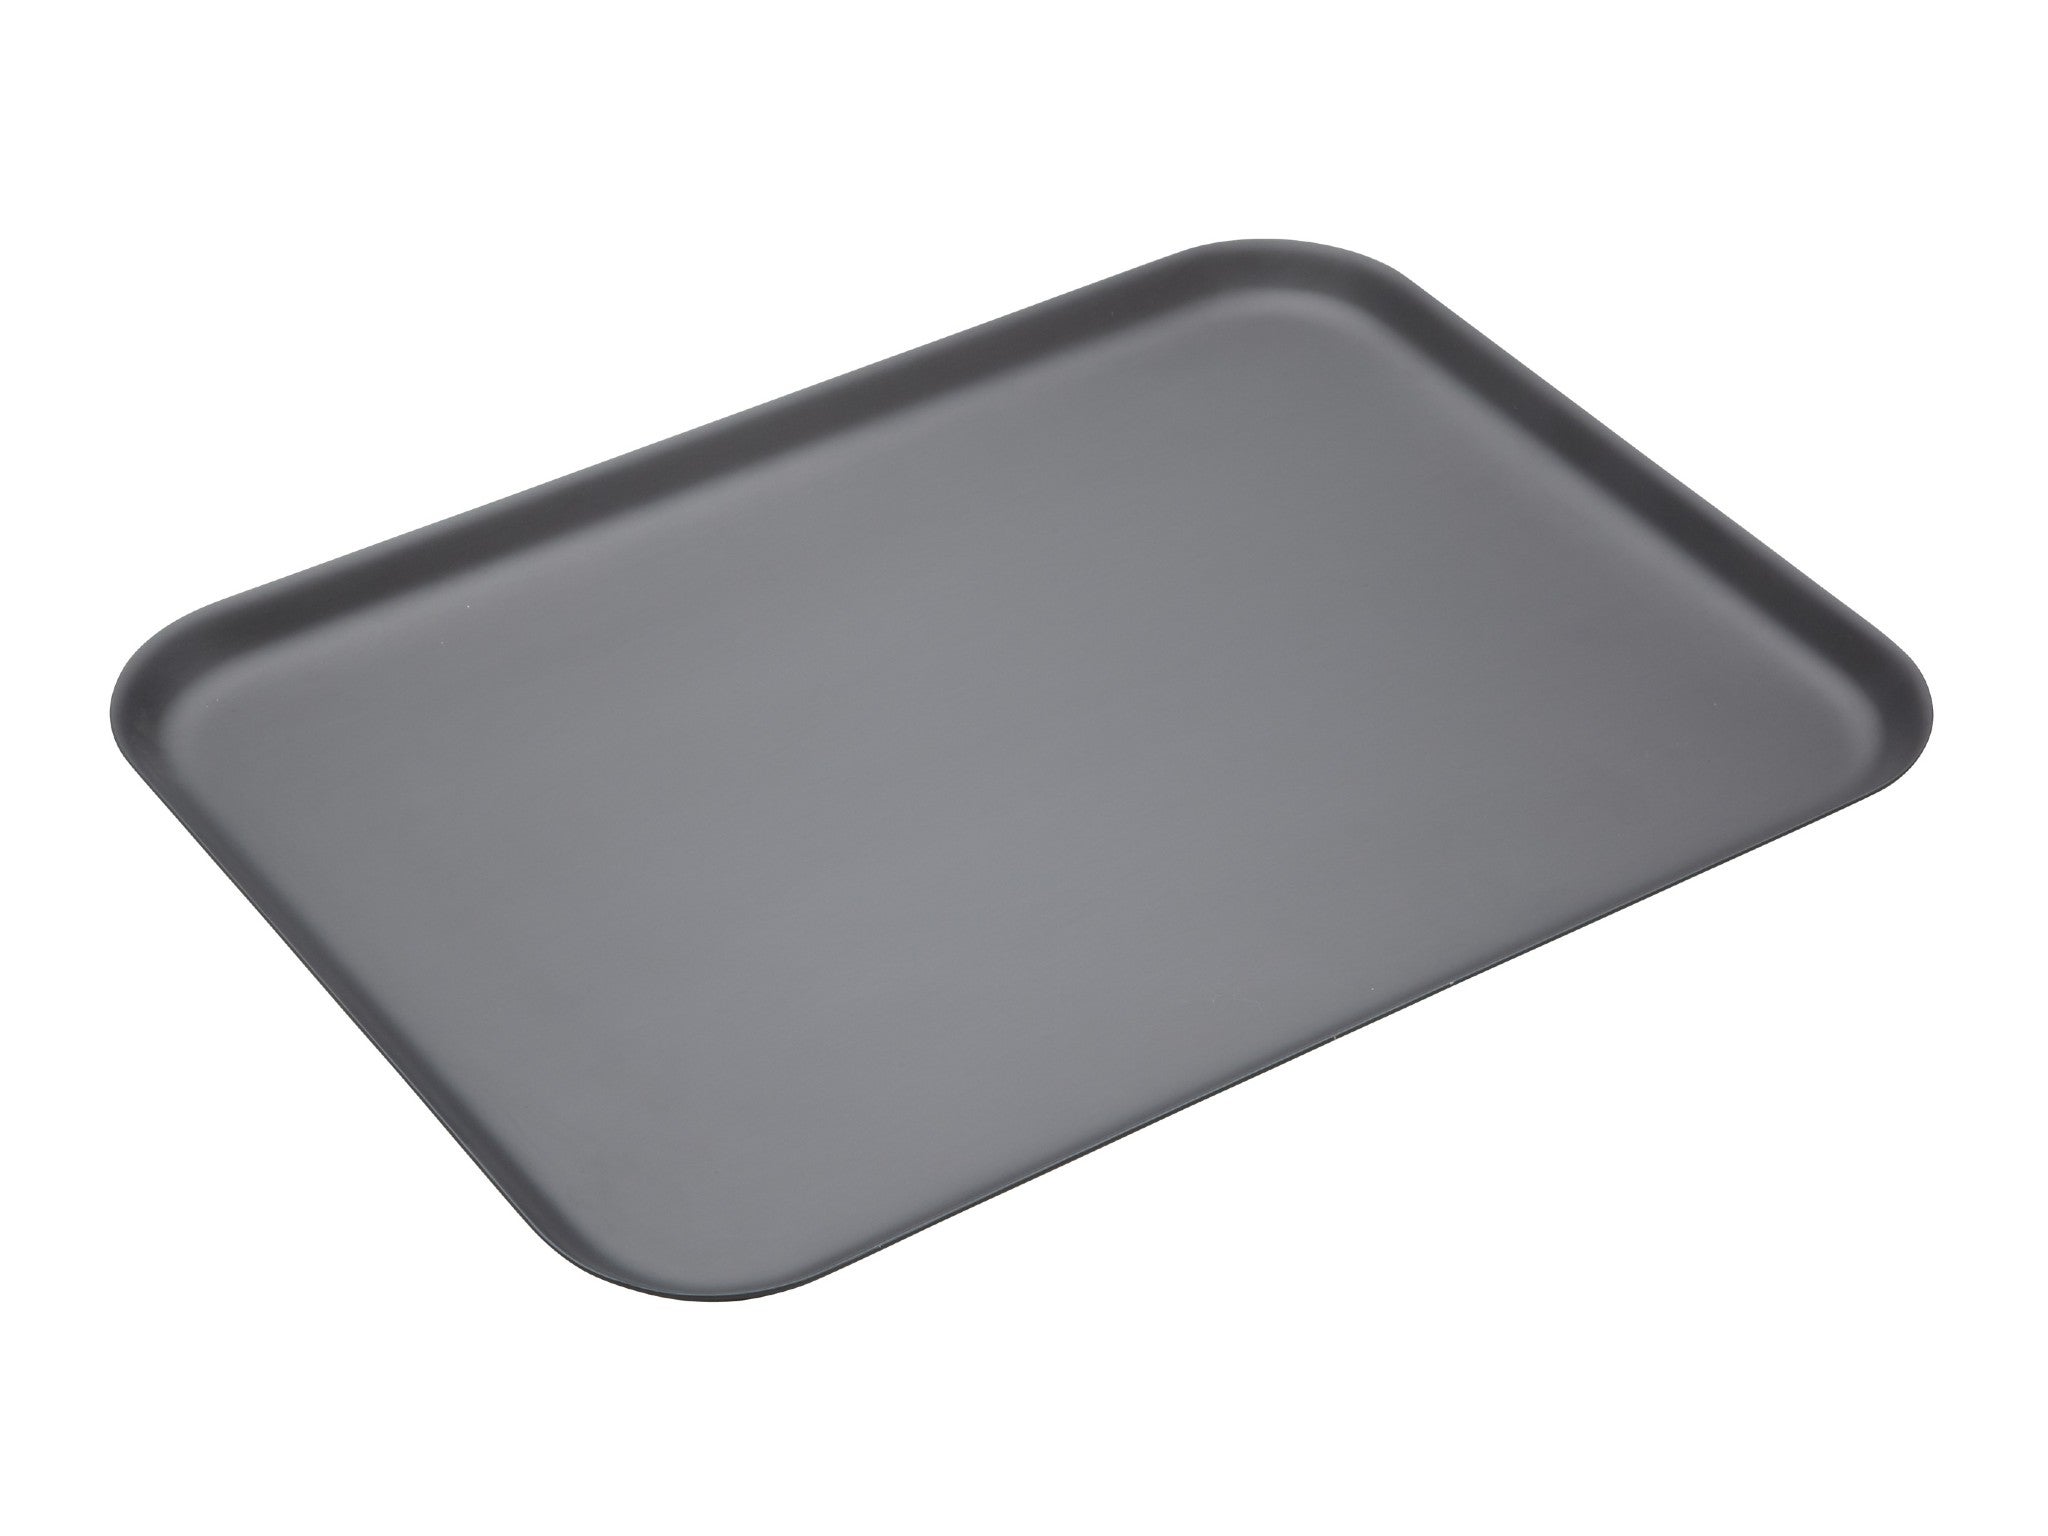 14.5 Baking Tray Oven and Dishwasher Safe Gold/Black Professional High Carbon Steel Baking Tray with PFOA Non Stick Large Baking Tray Pans Durable Rectangle Baking Sheet LxwSin Baking Tray